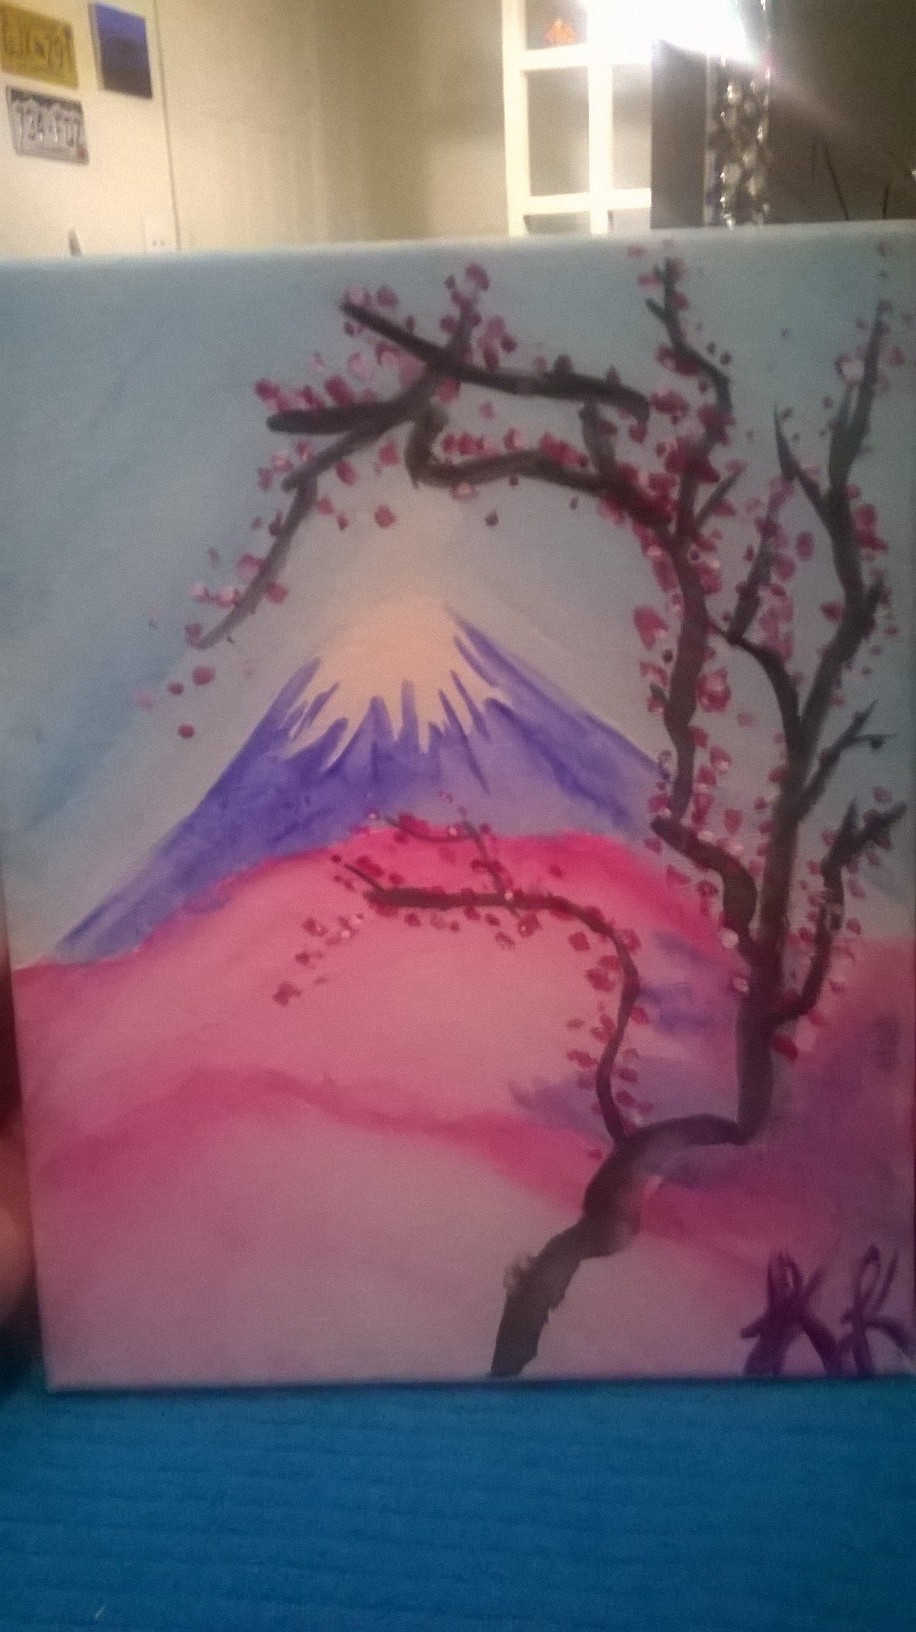 My crappy camera on my phone doesn’t do this justice. I love my watercolor on canvas